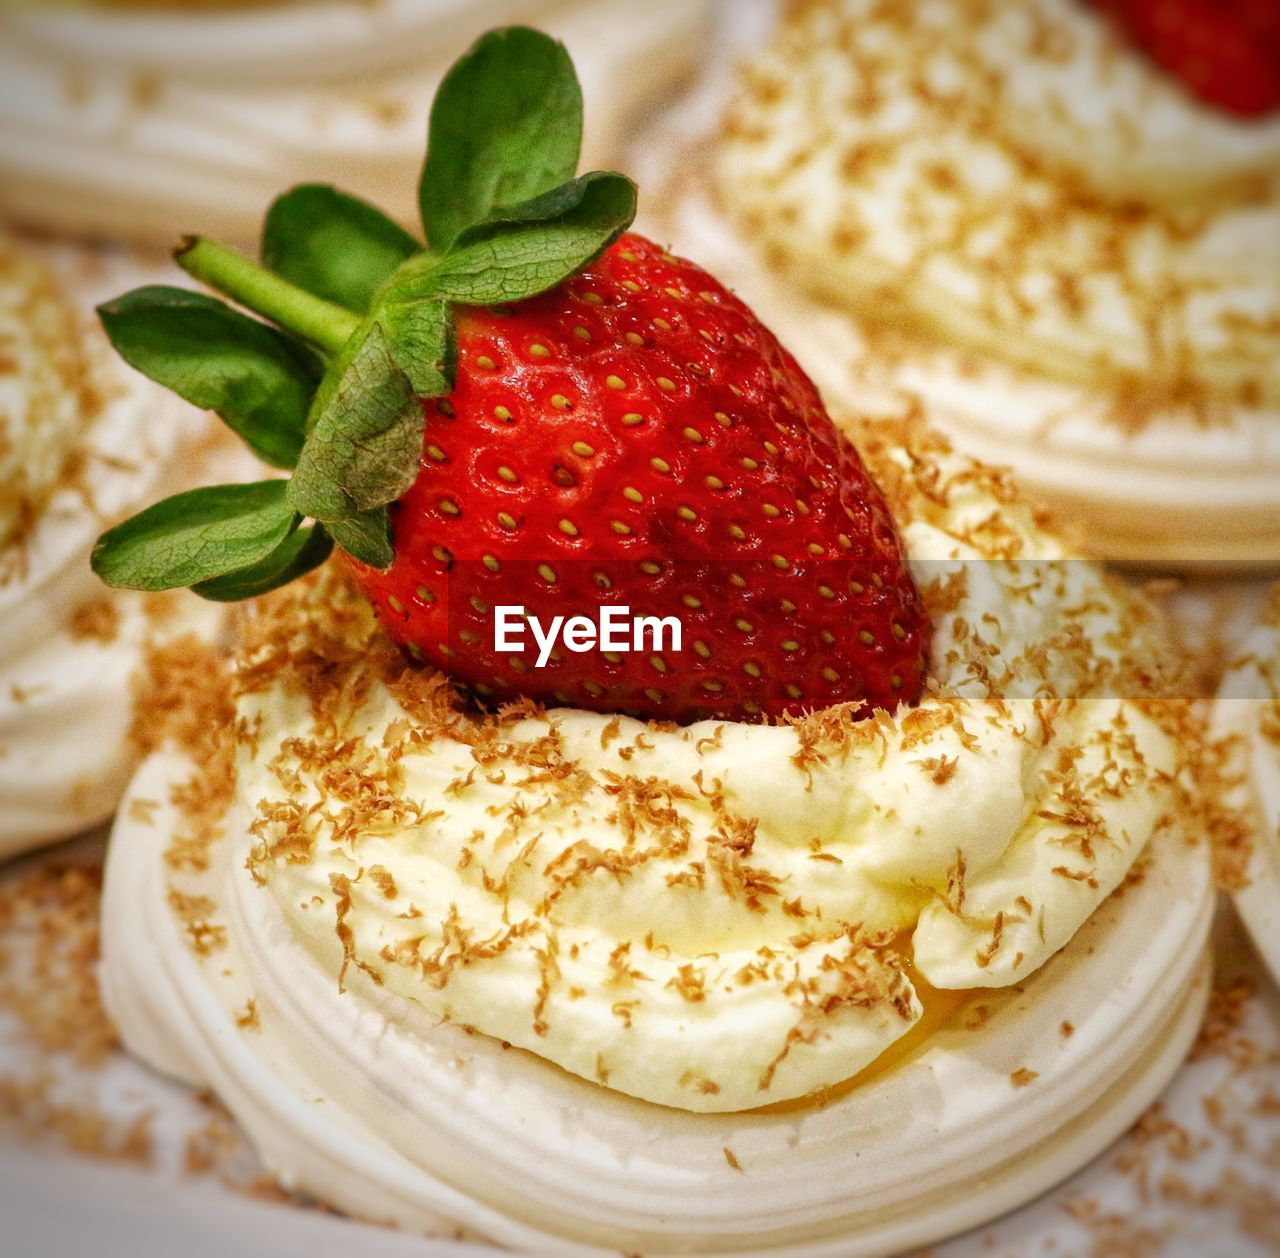 Close-up of strawberry on whipped cream